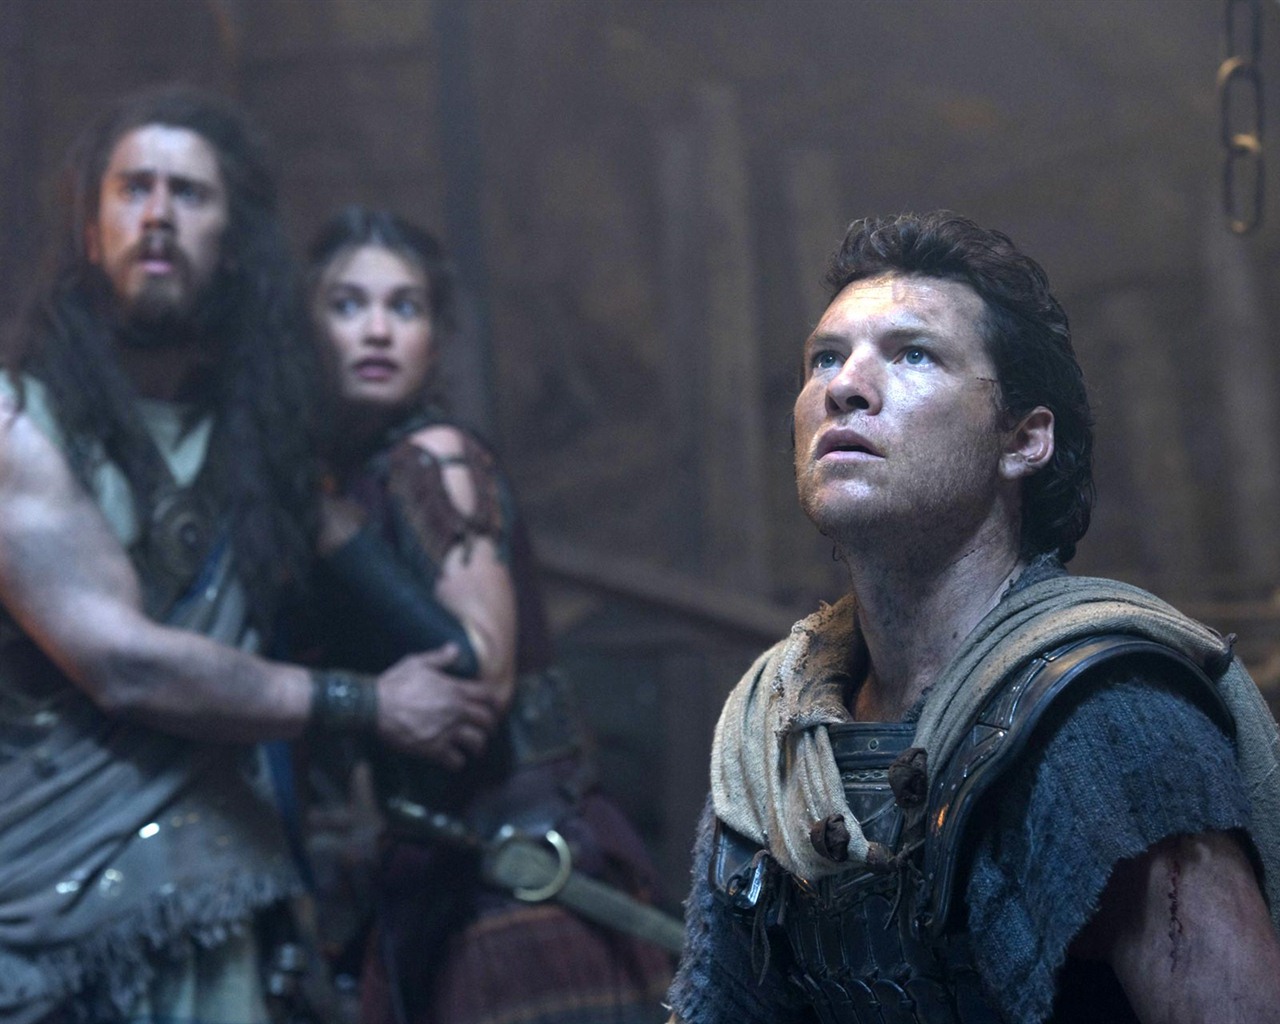 Wrath of the Titans HD Wallpapers #4 - 1280x1024